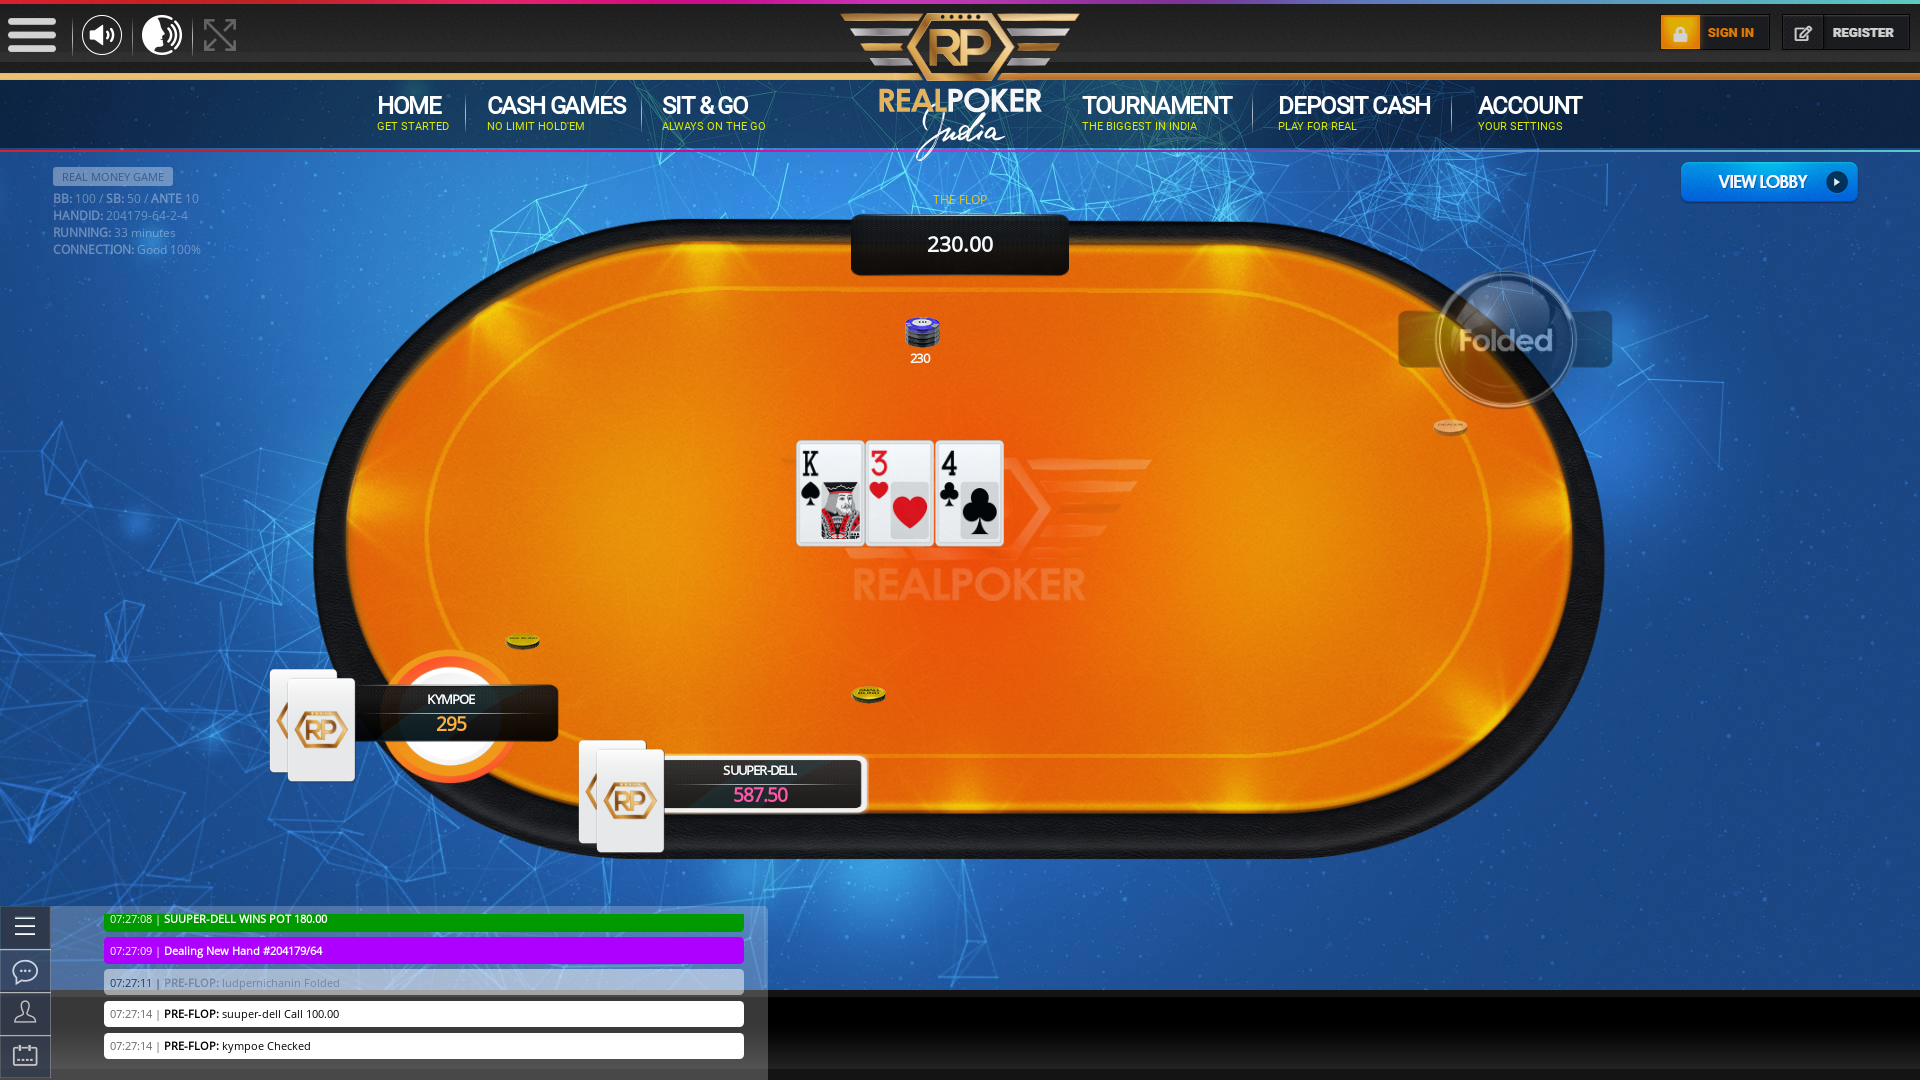 Real Indian poker on a 10 player table in the 32nd minute of the game